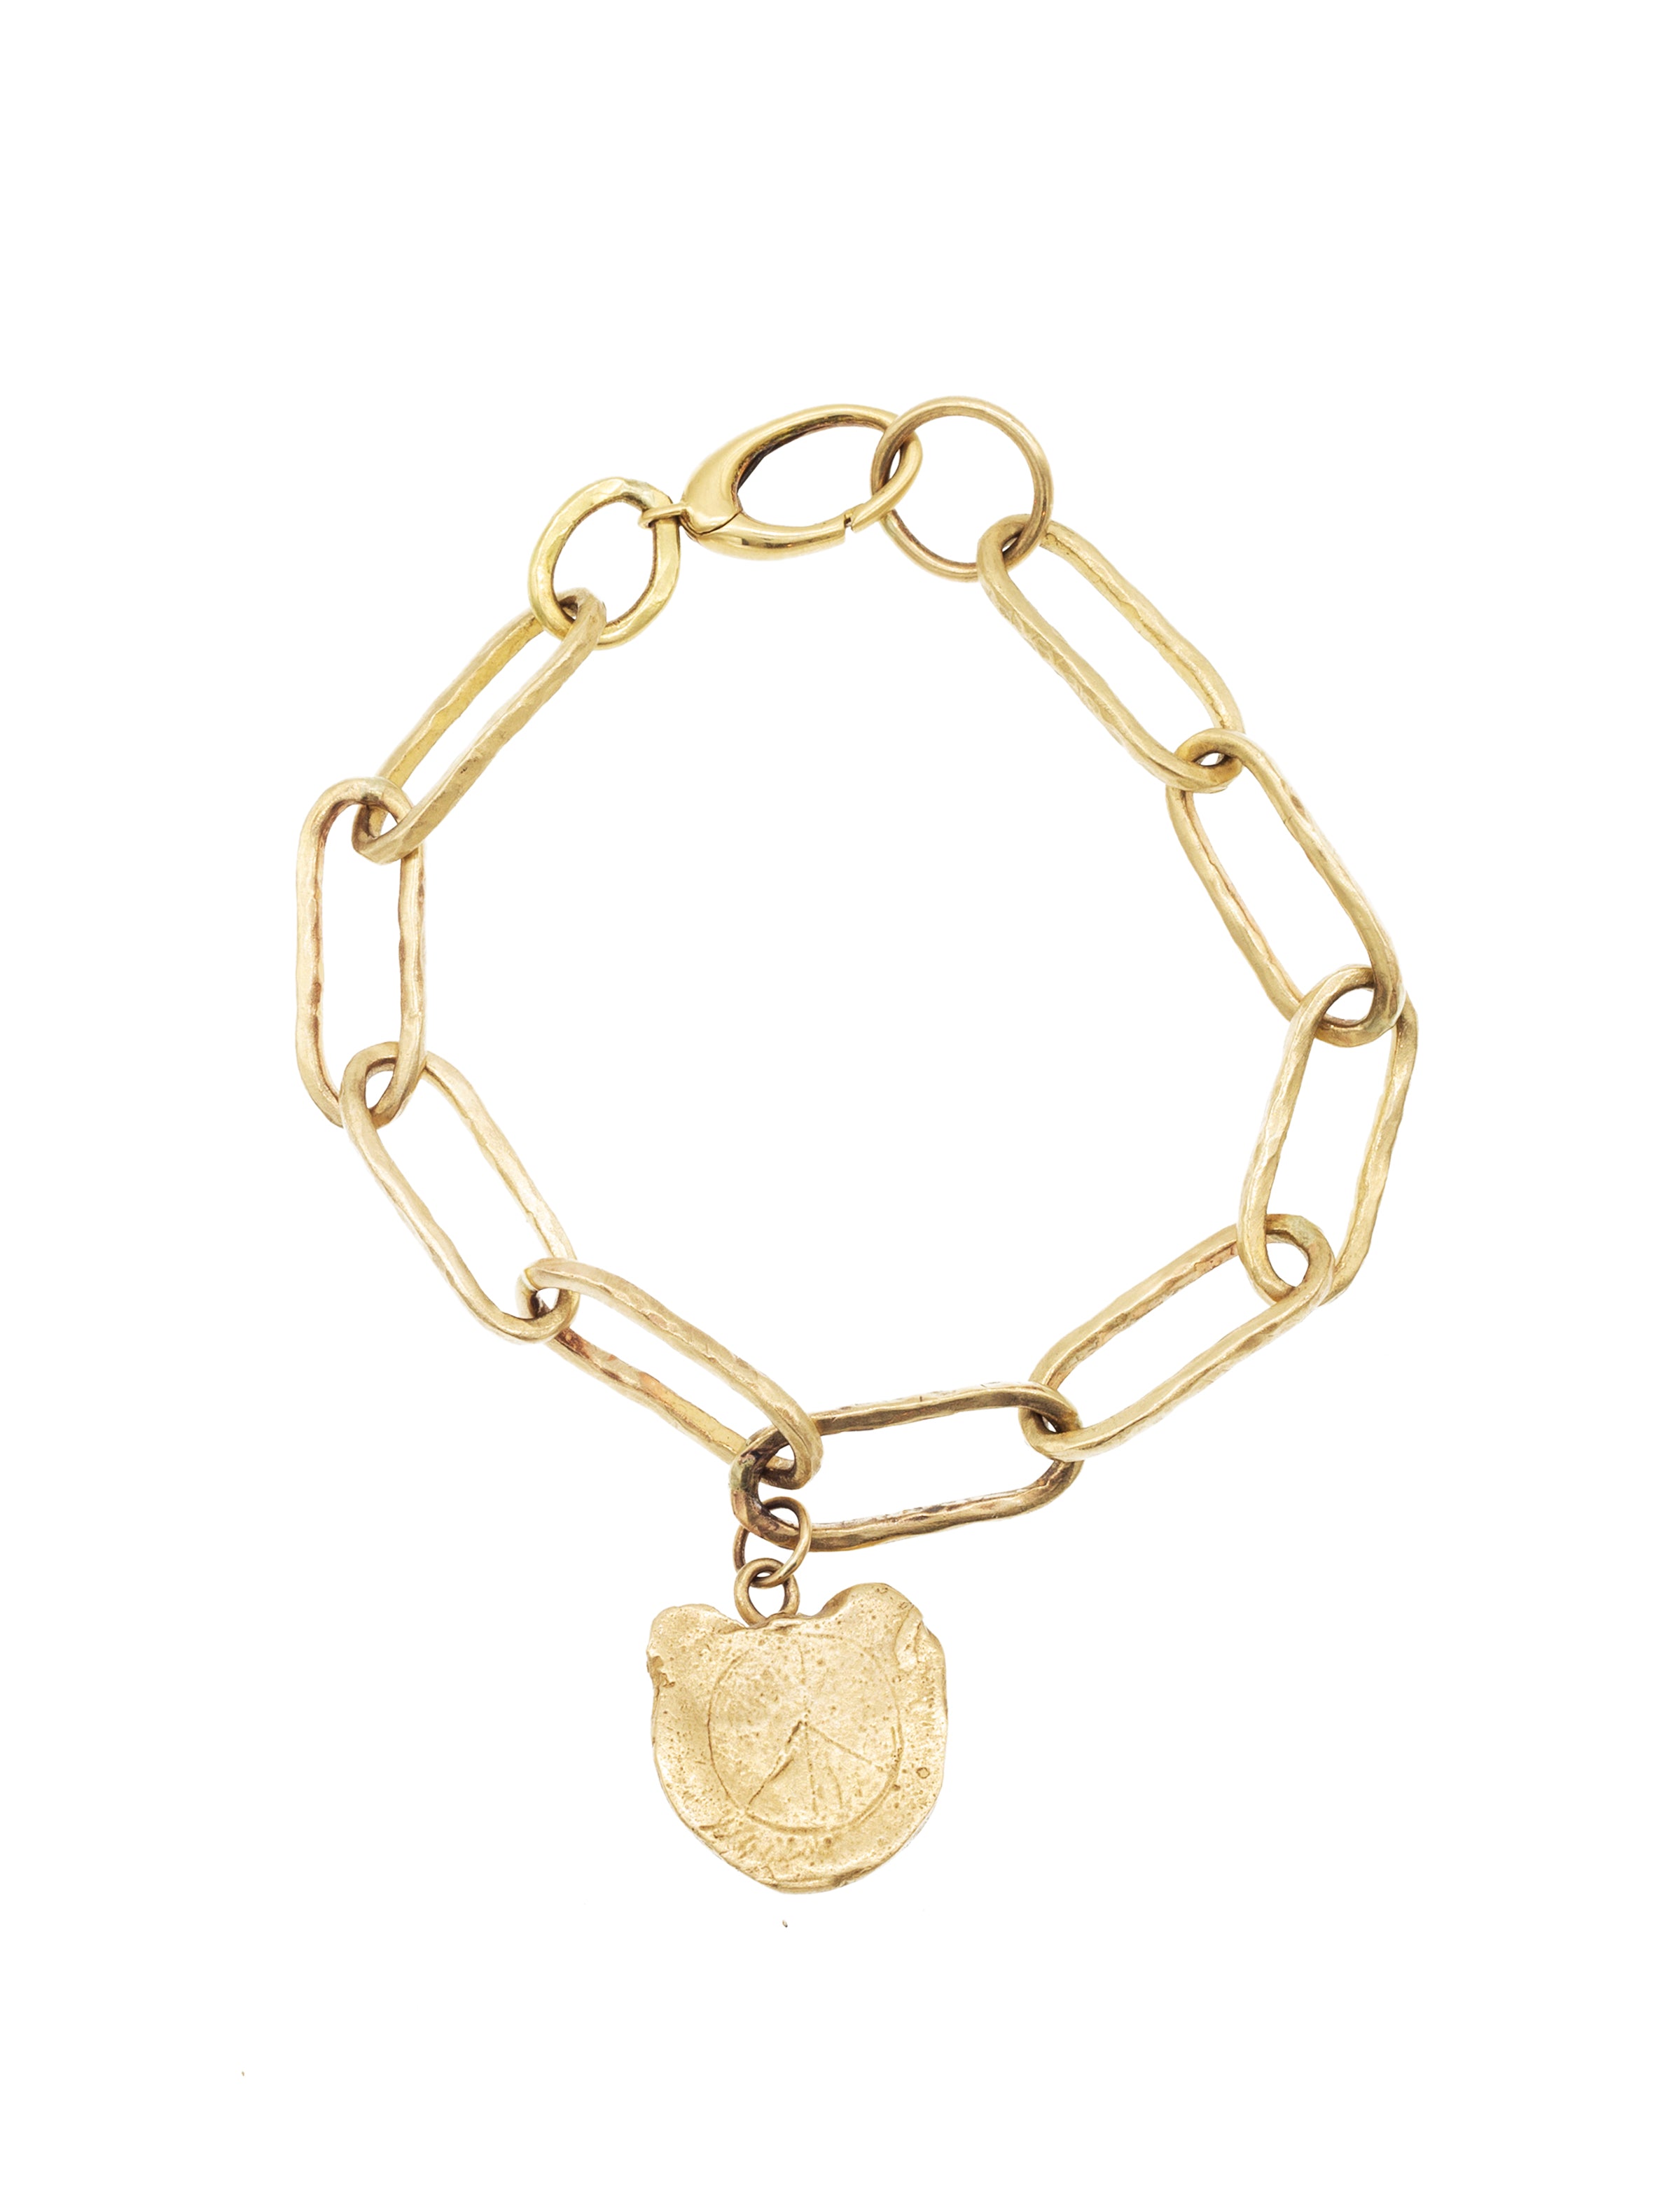 Walk With The Lioness Bracelet